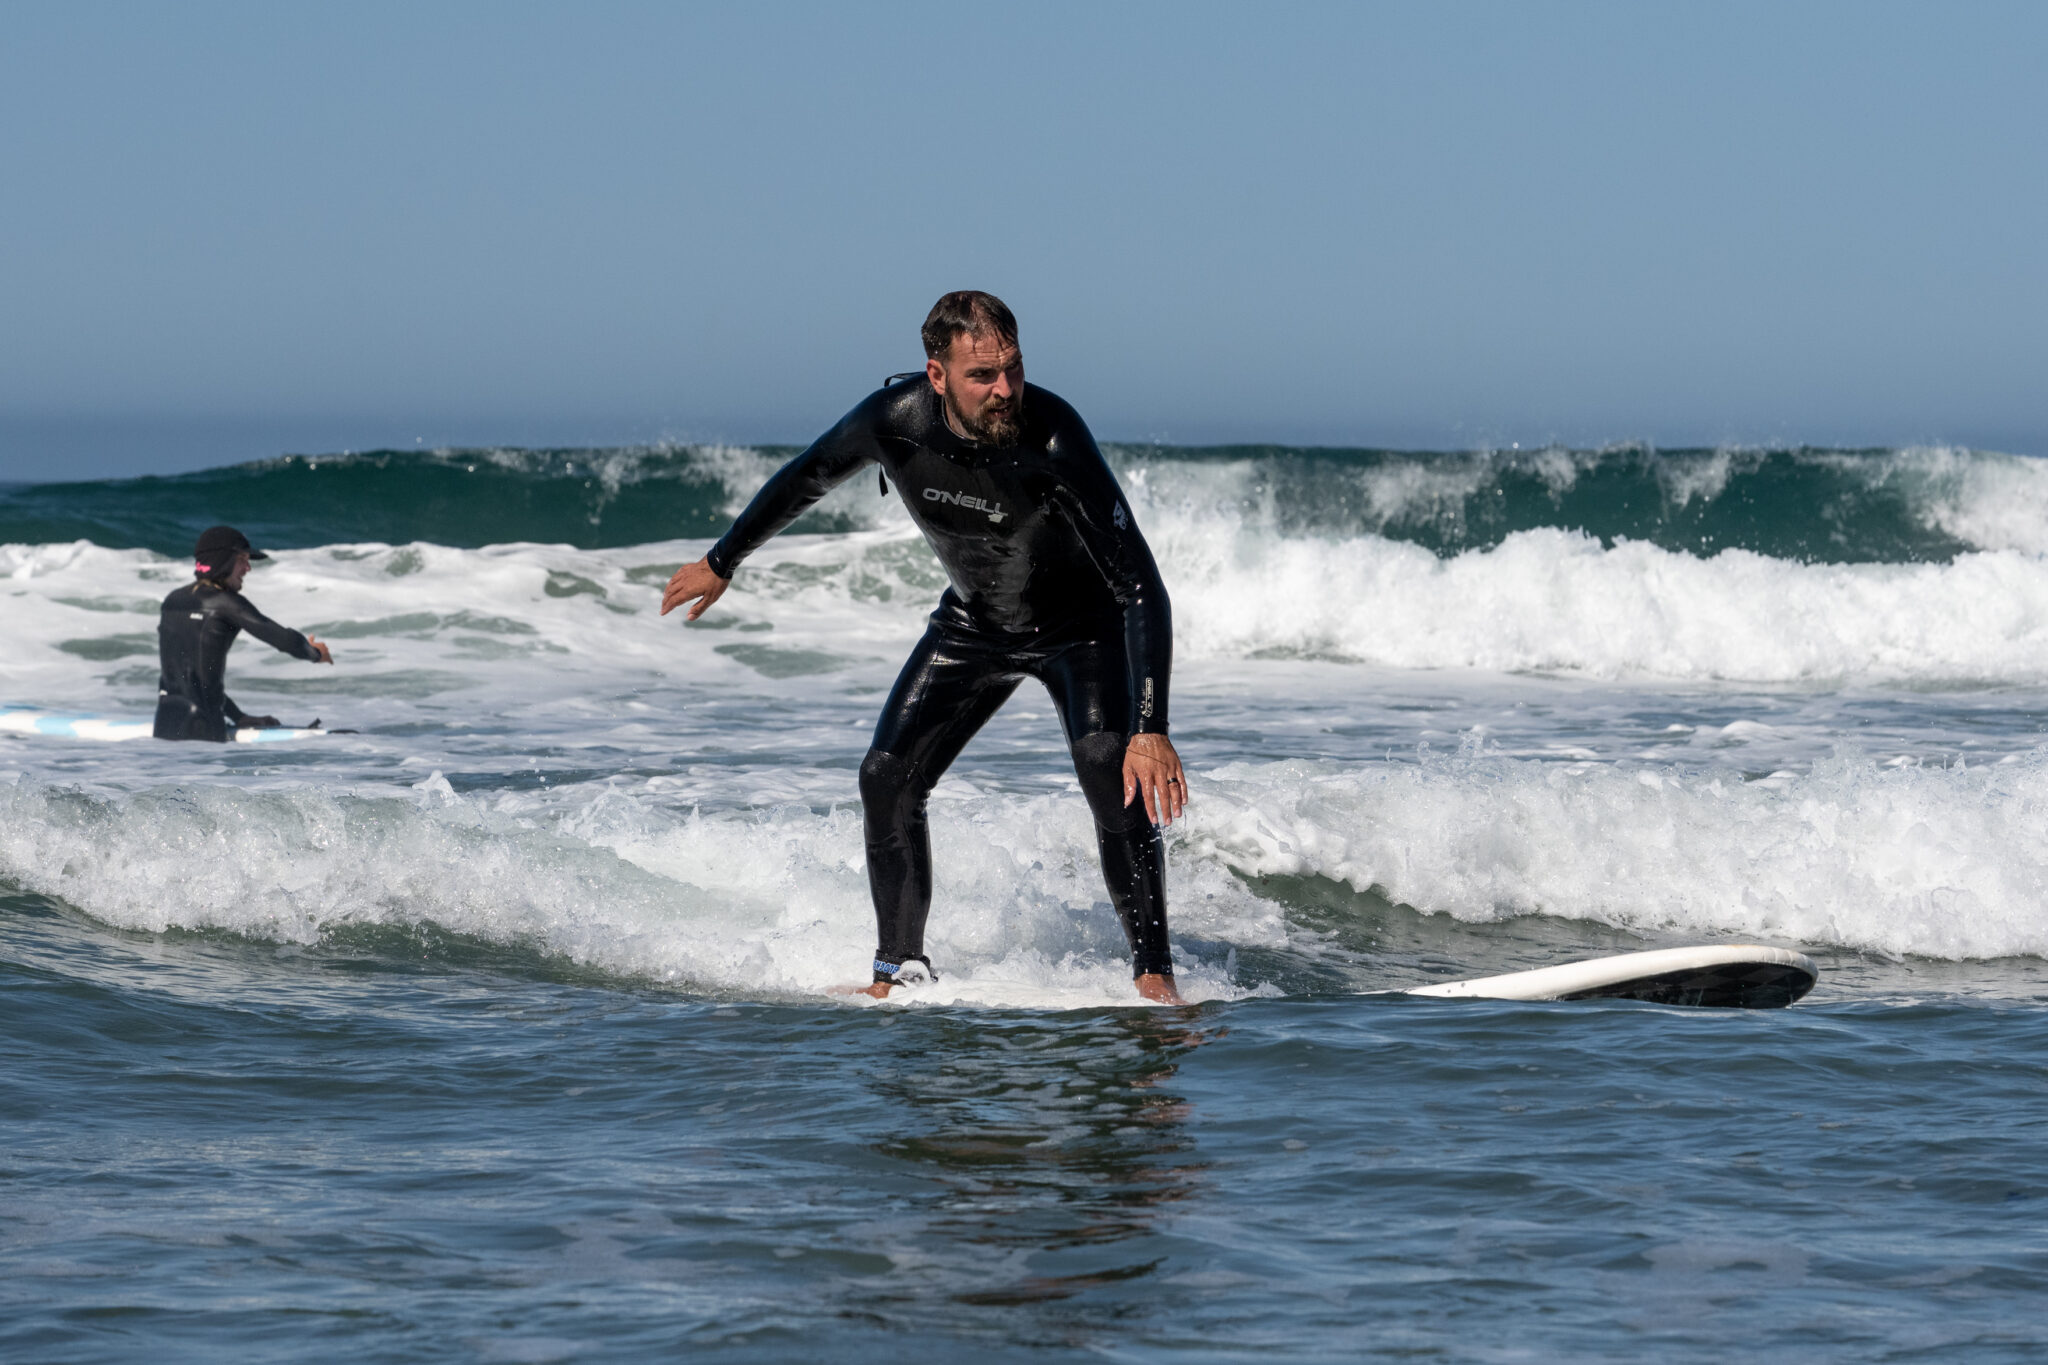 First Descents: Out Living (and Surfing) It | A Ballsy Sense of Tumor